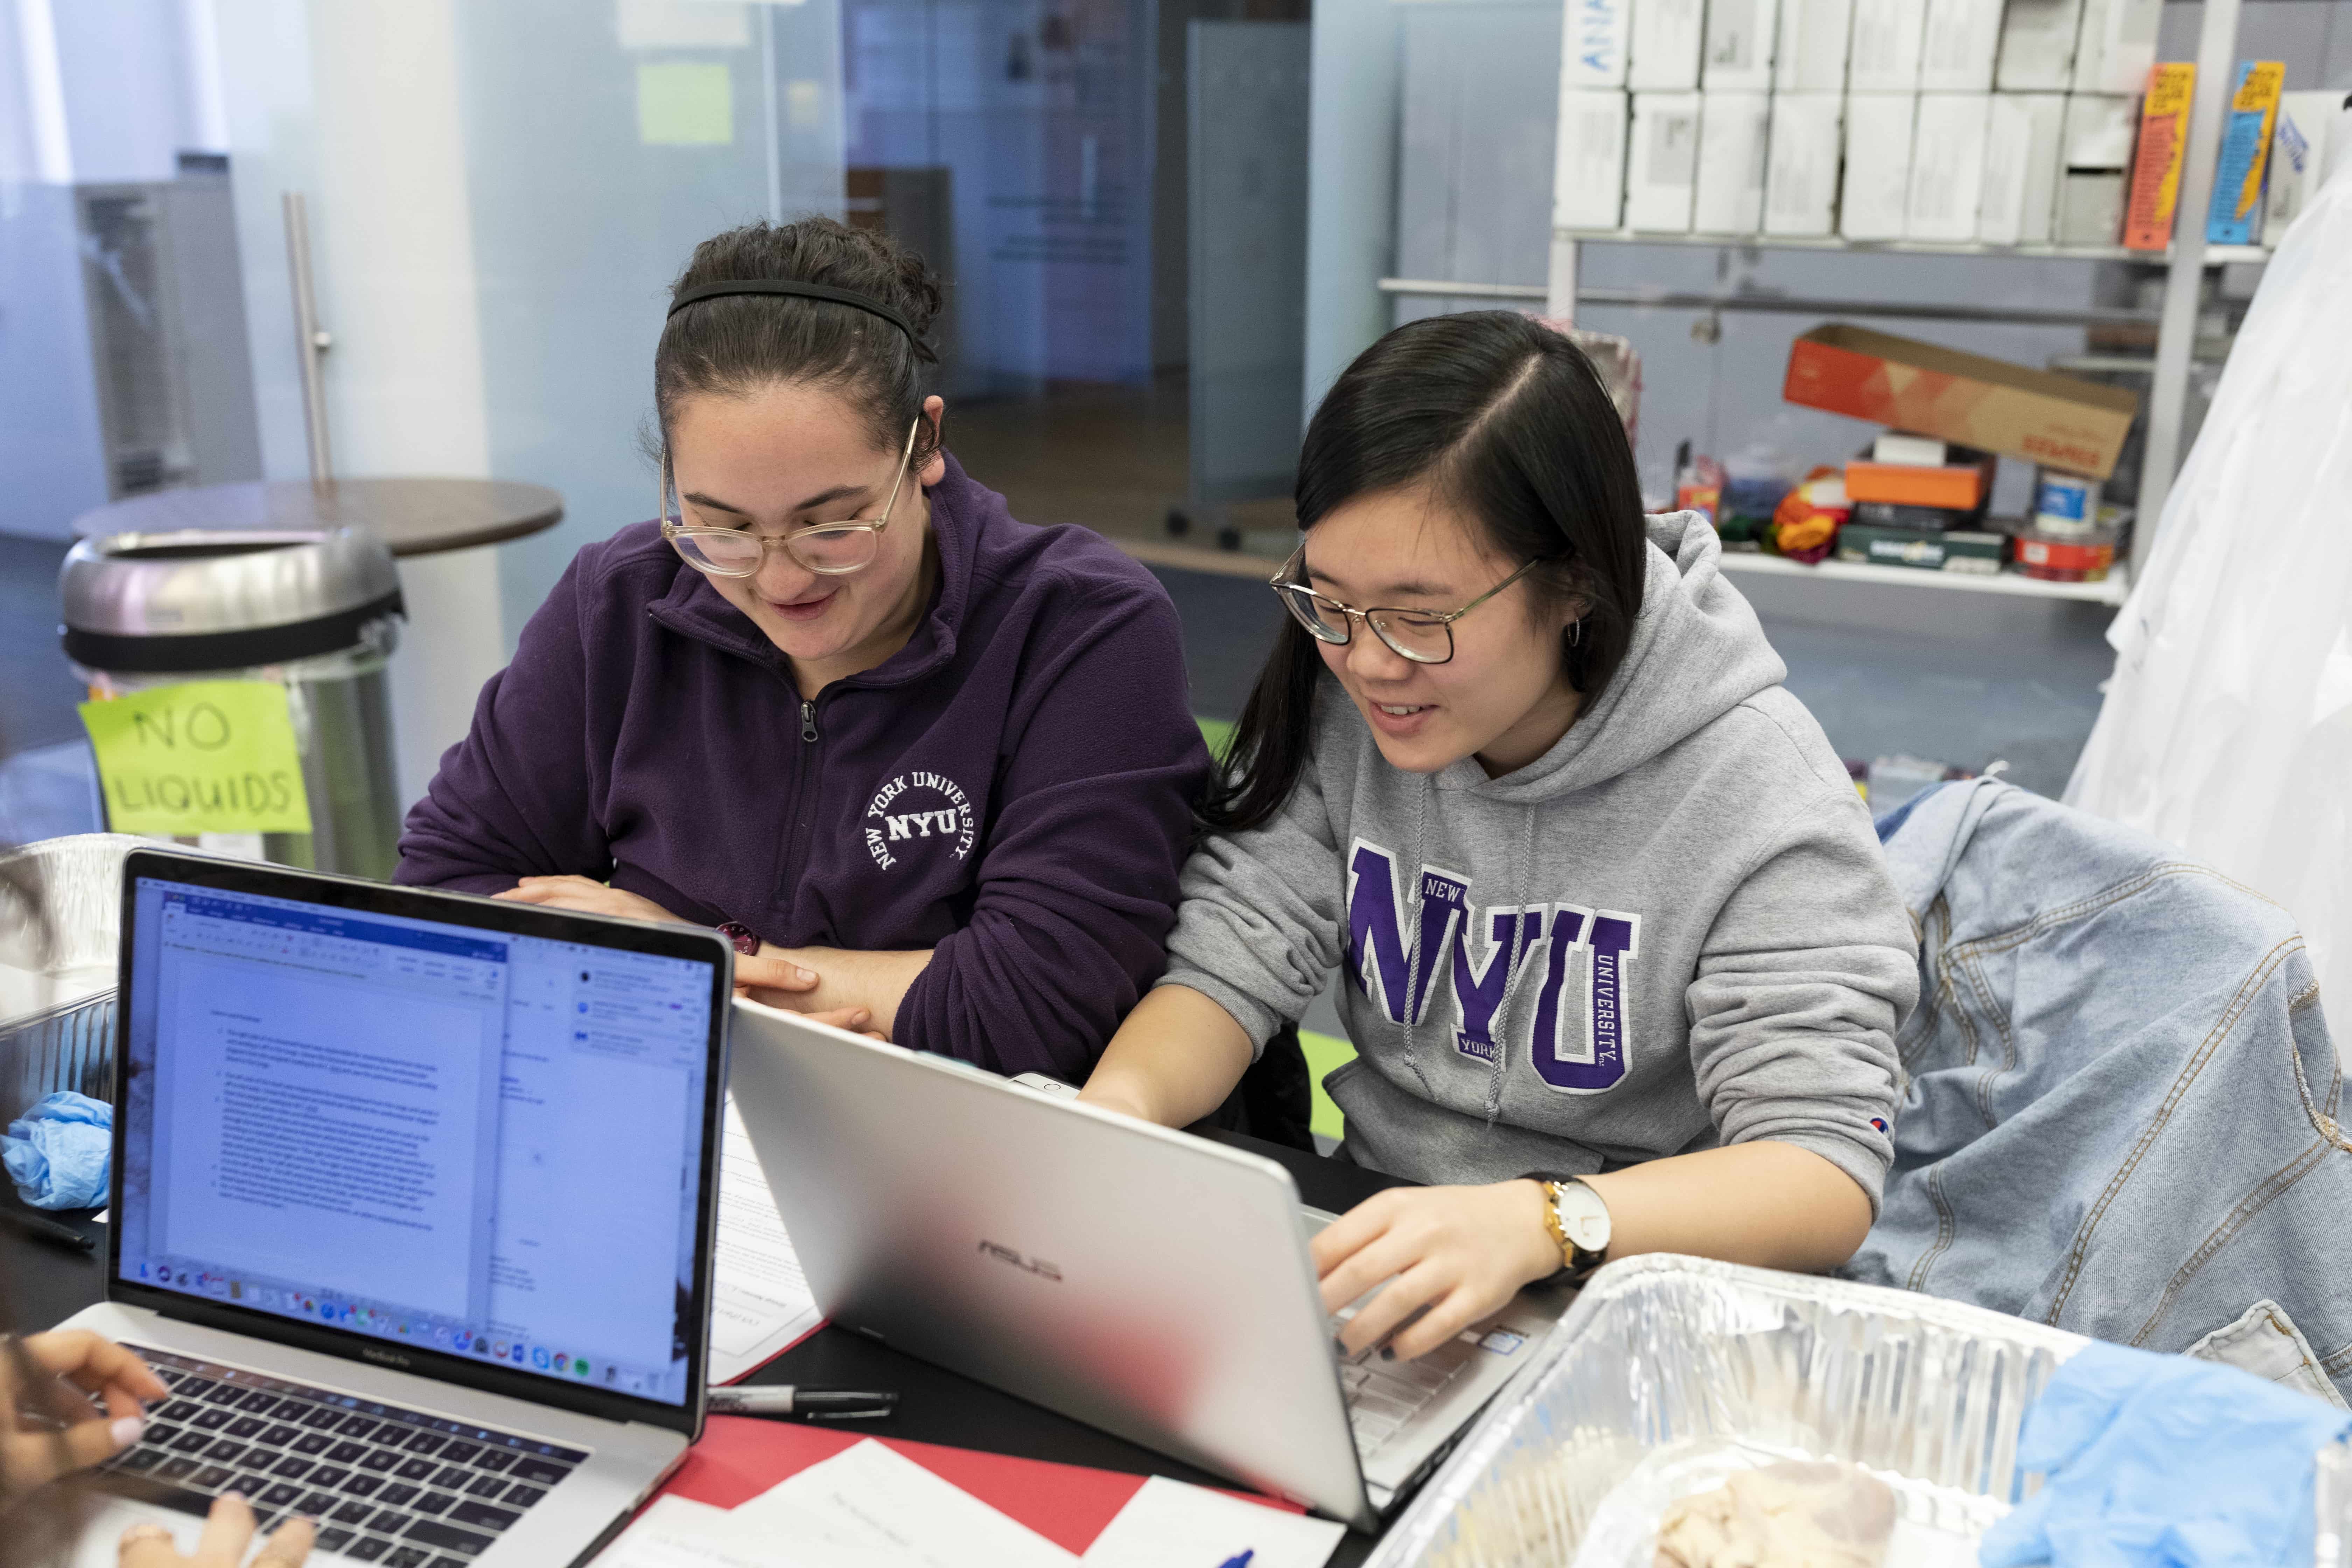 Two students working together in a lab on campus.